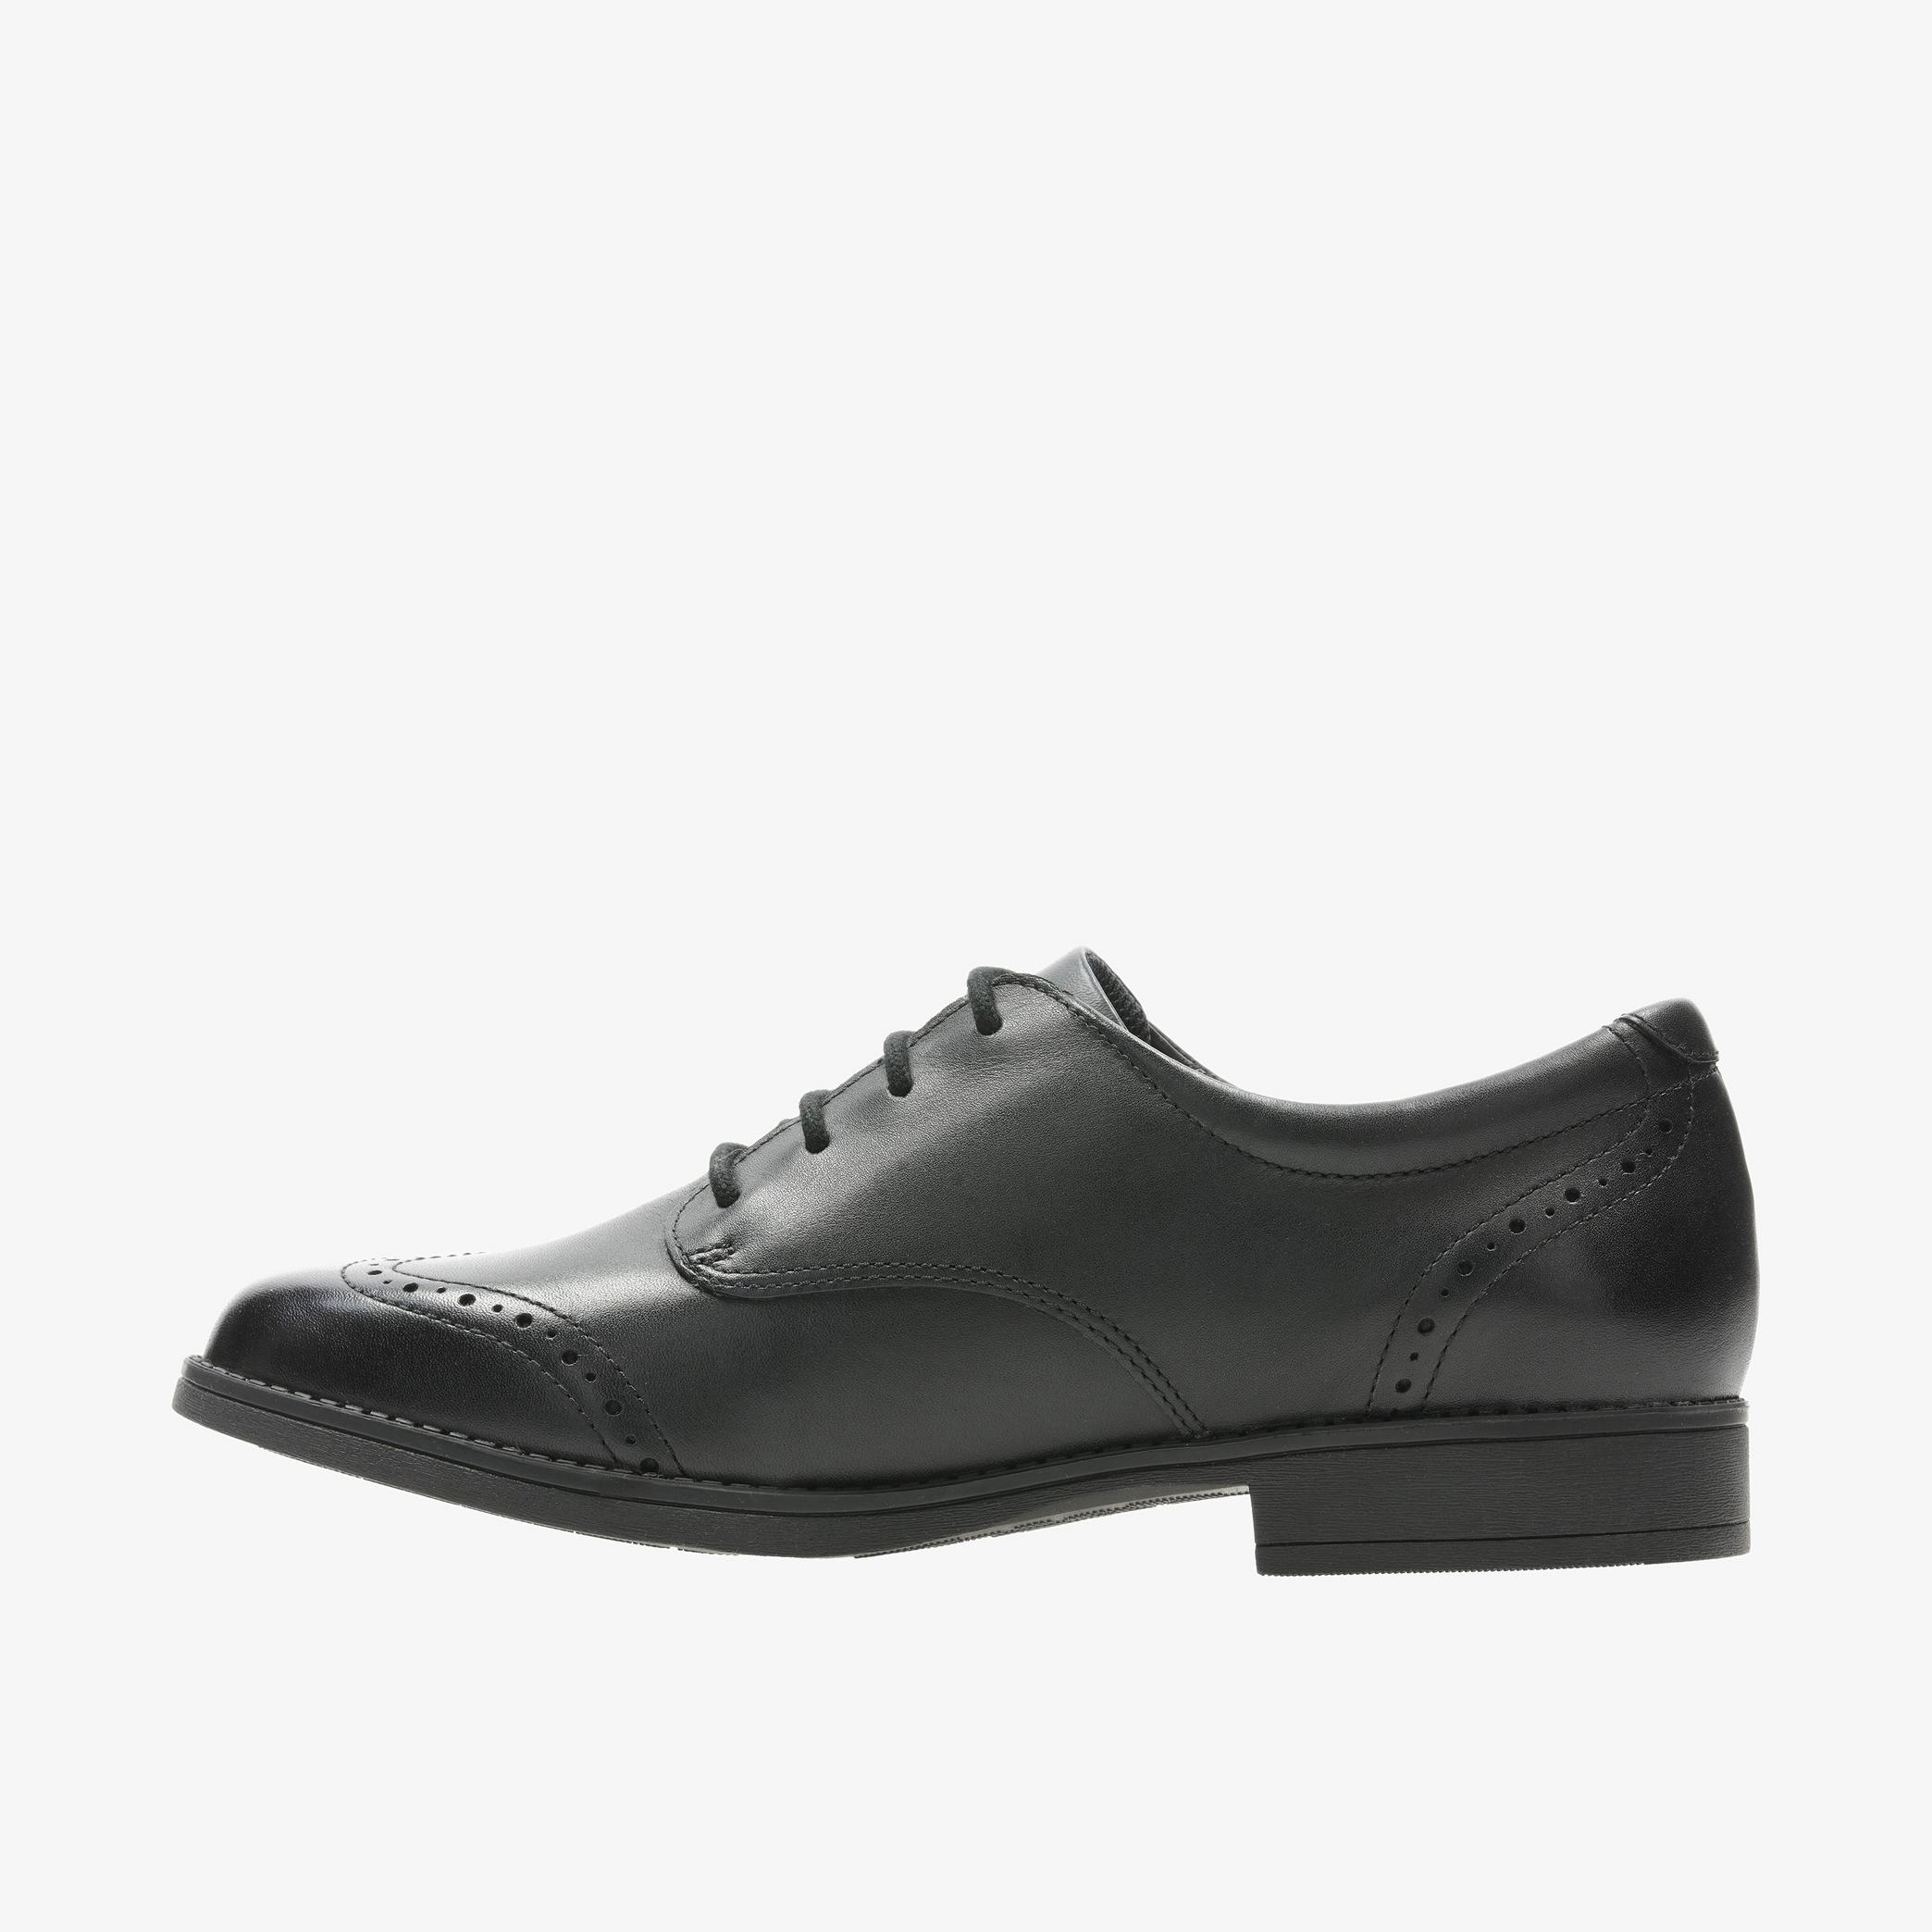 Sami Walk Youth Black Leather Brogues, view 2 of 6